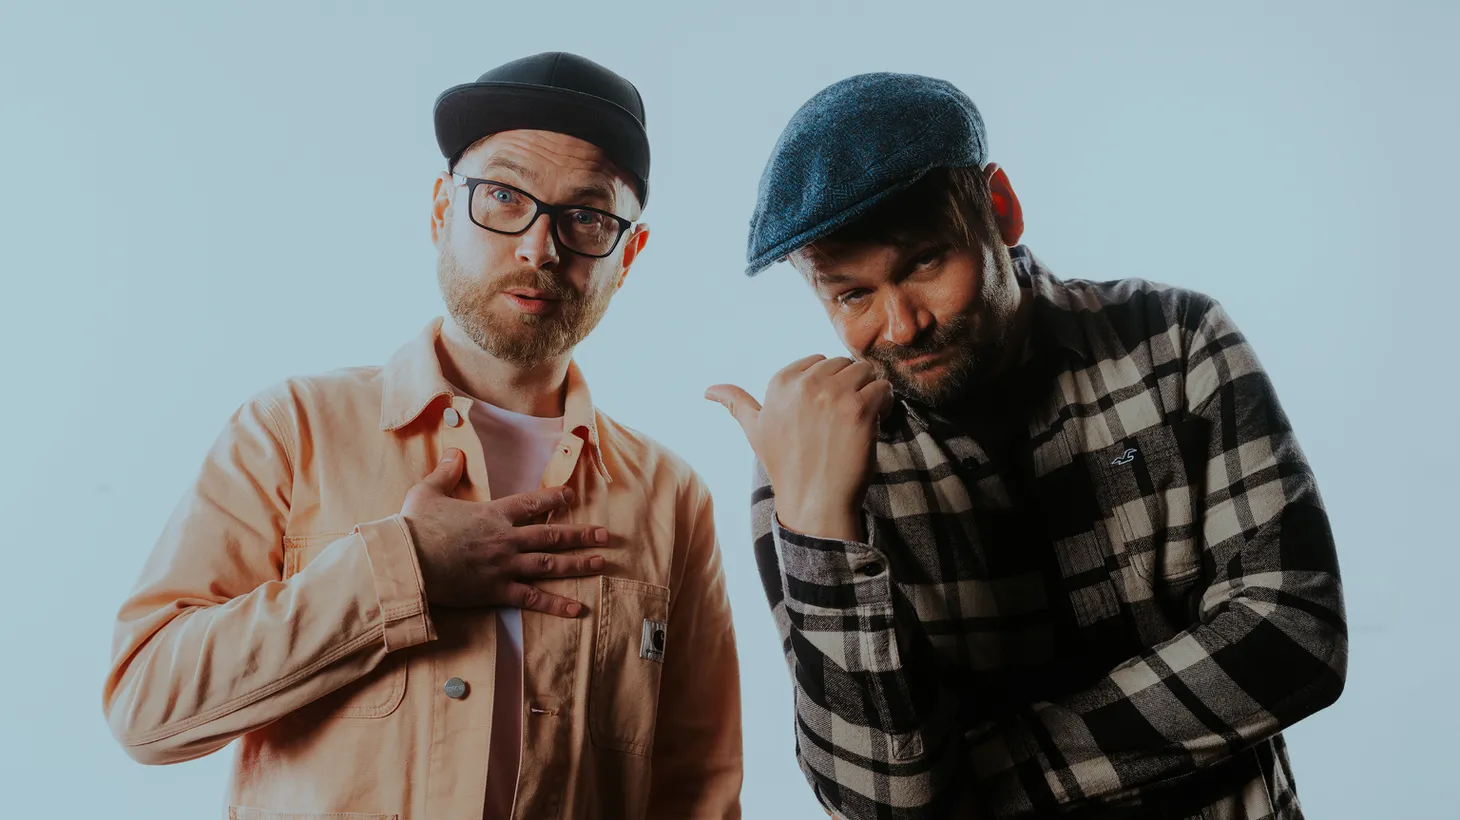 Serving up a soul-swaggering vintage sound, Bristol-based DJ and production duo The Allergies are back firing off “Sometimes I Wonder,” replete with bluesy vocals and brassy beats.